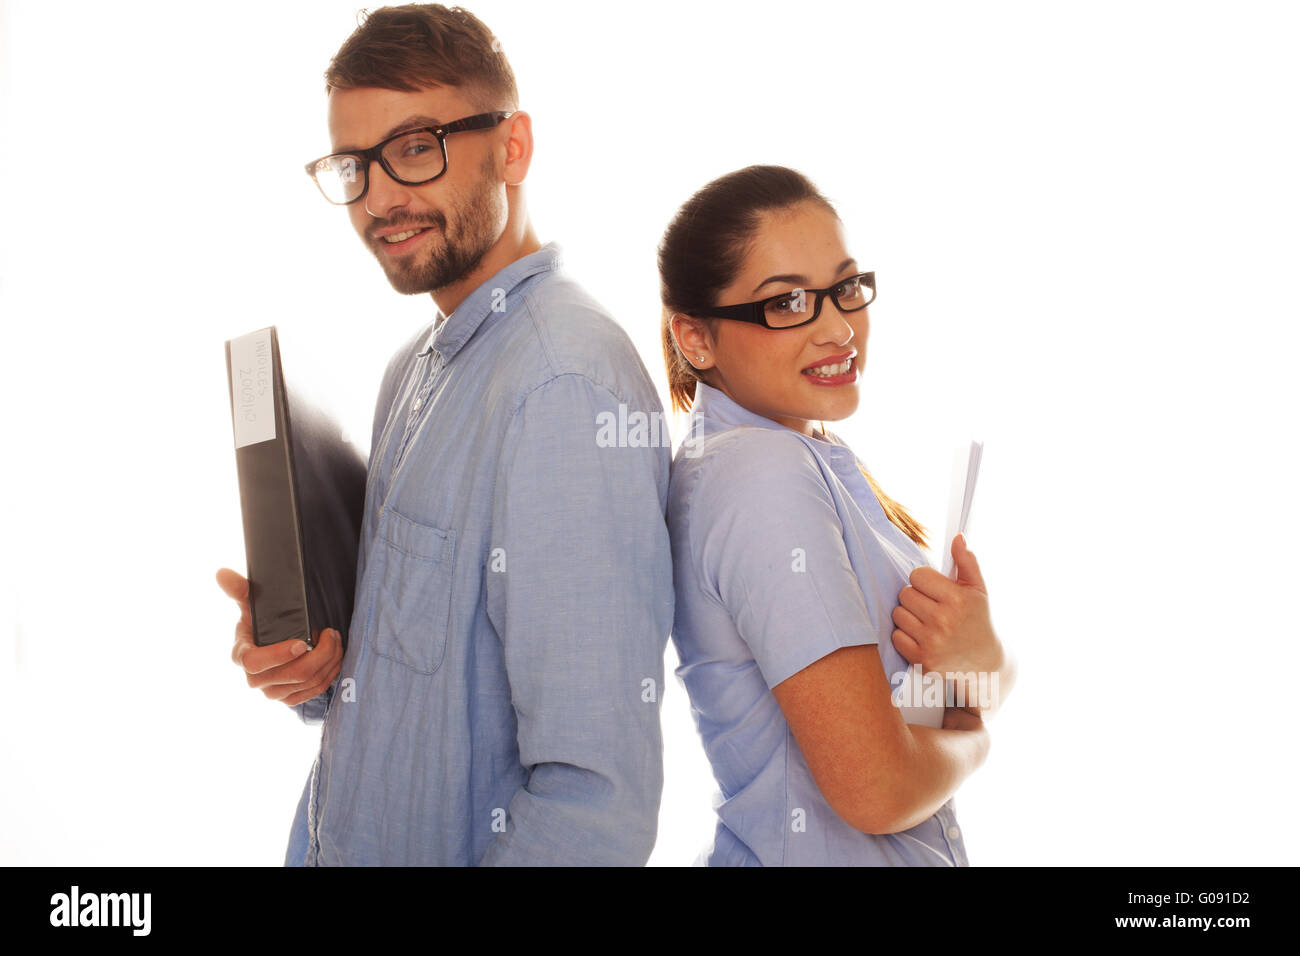 Nerdy couple holding files in a white background Stock Photo